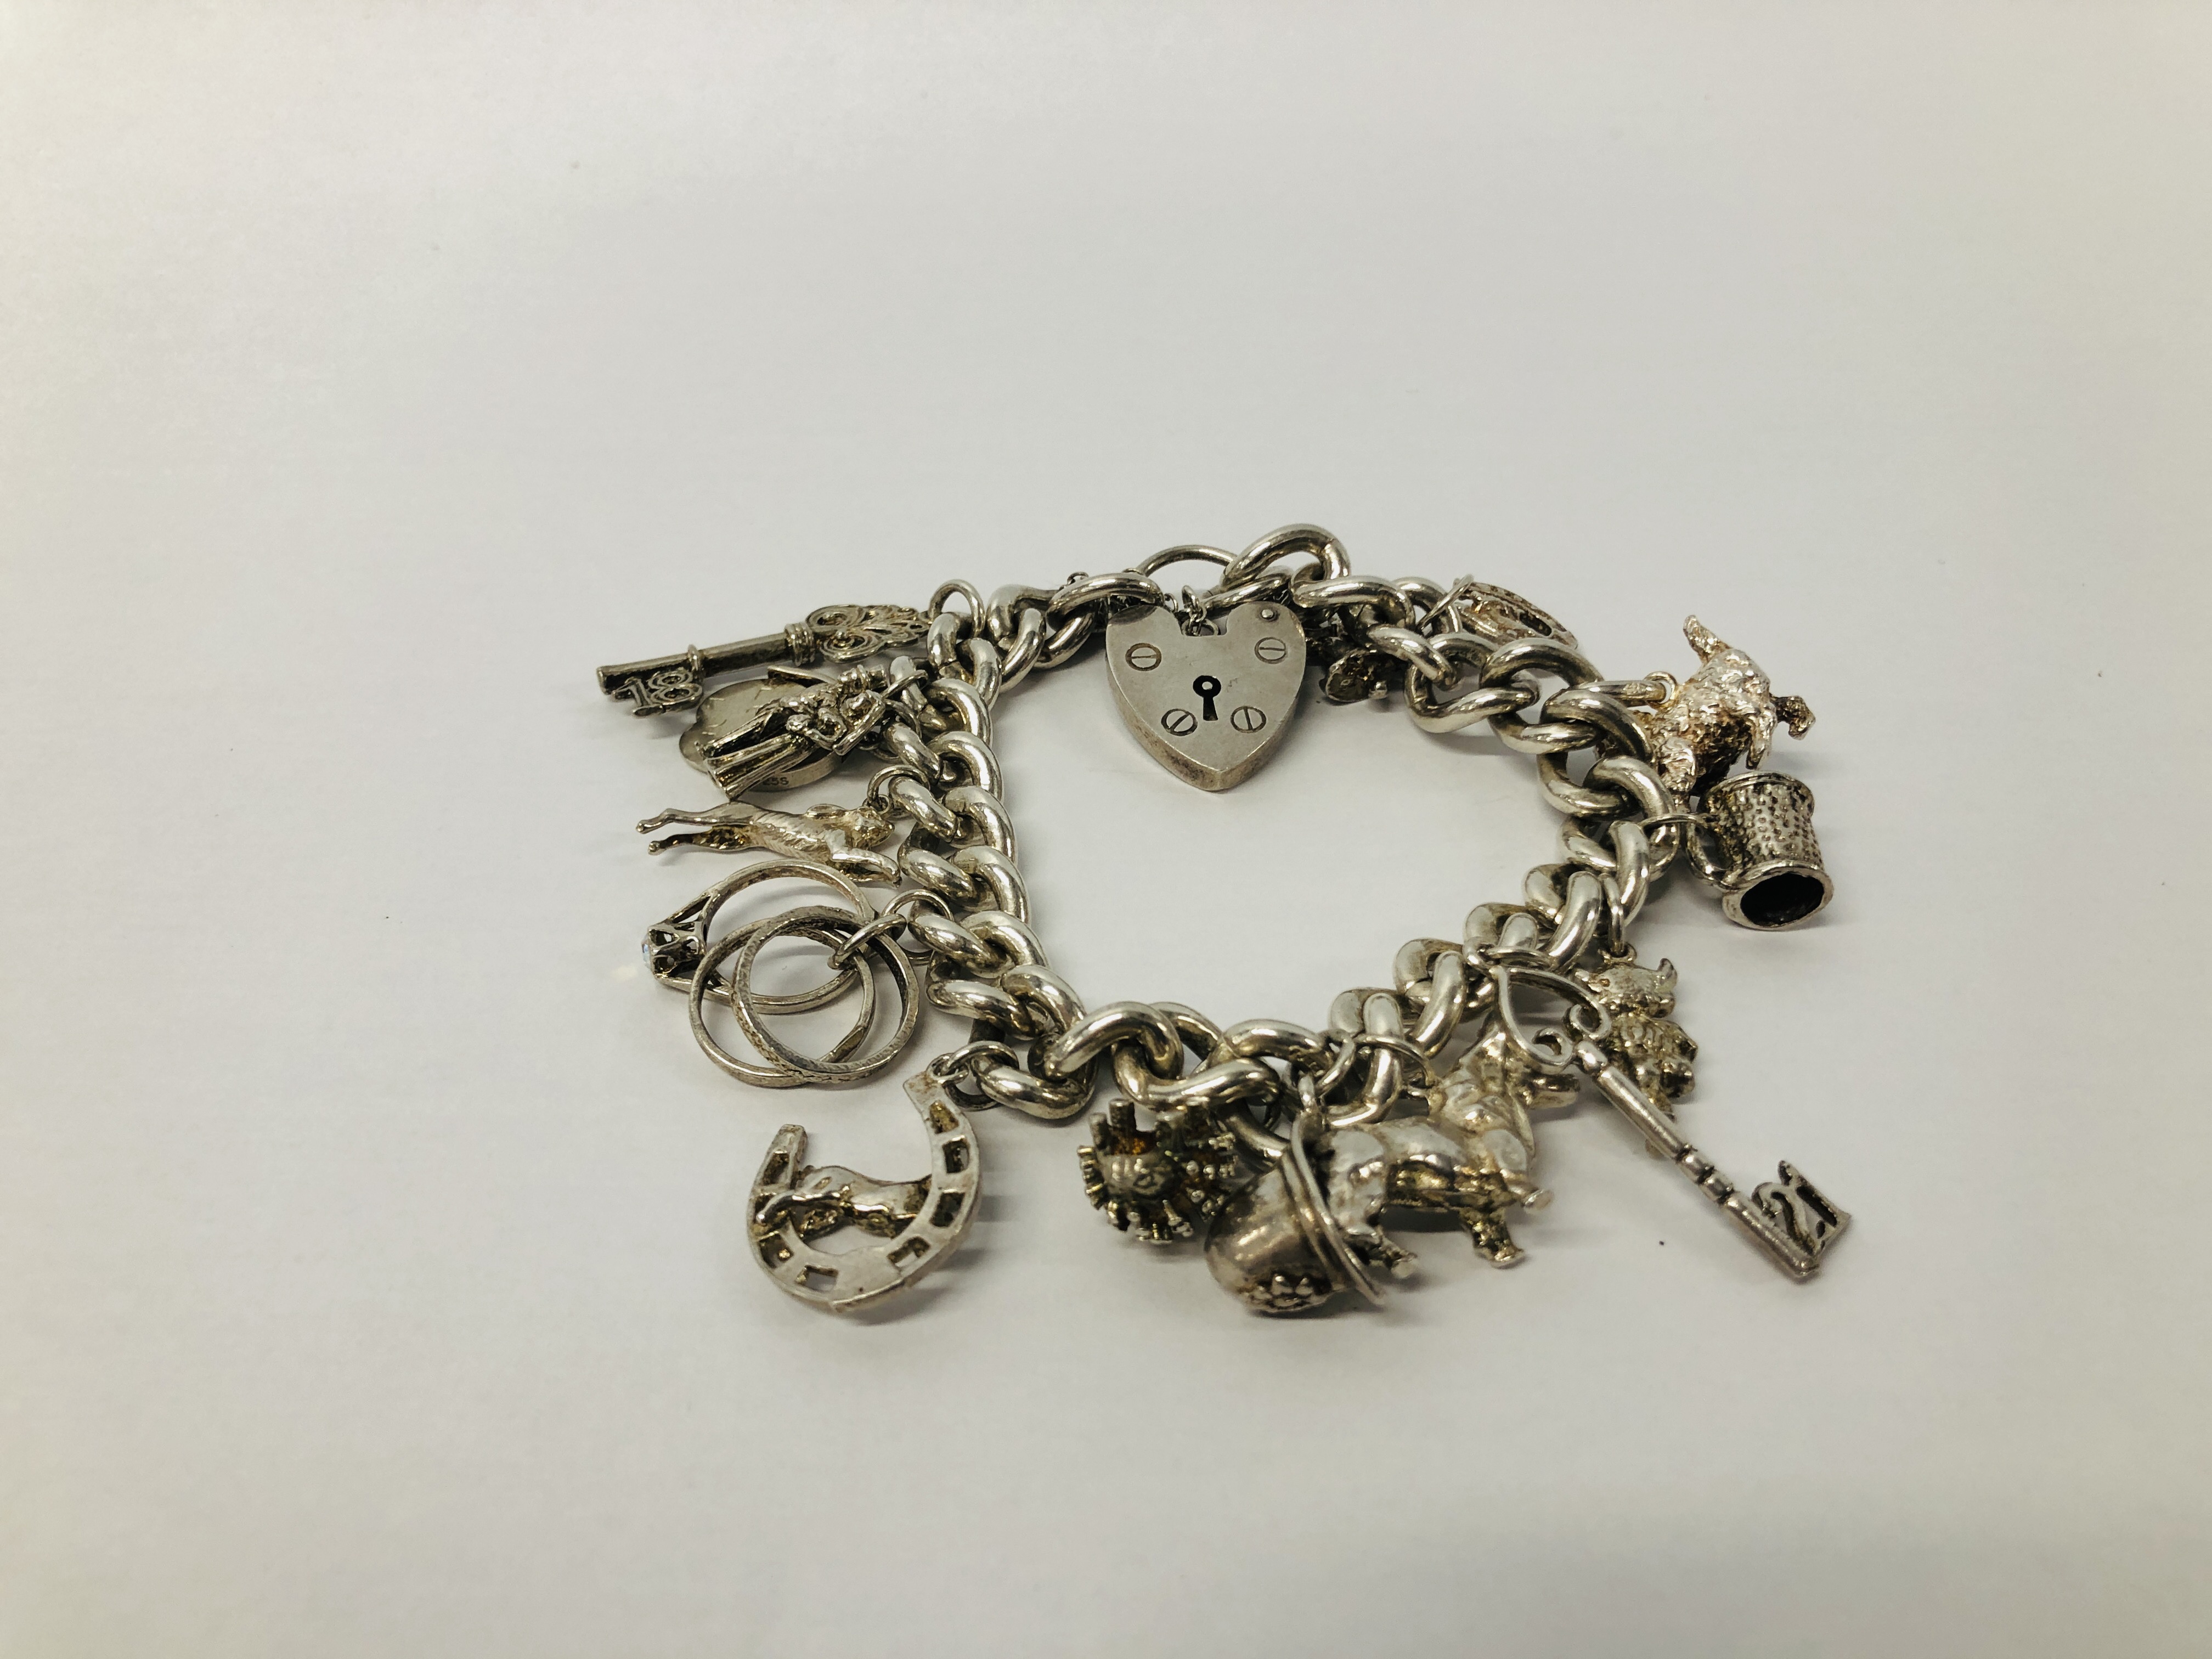 SILVER CHARM BRACELET (15 CHARMS ATTACHED)